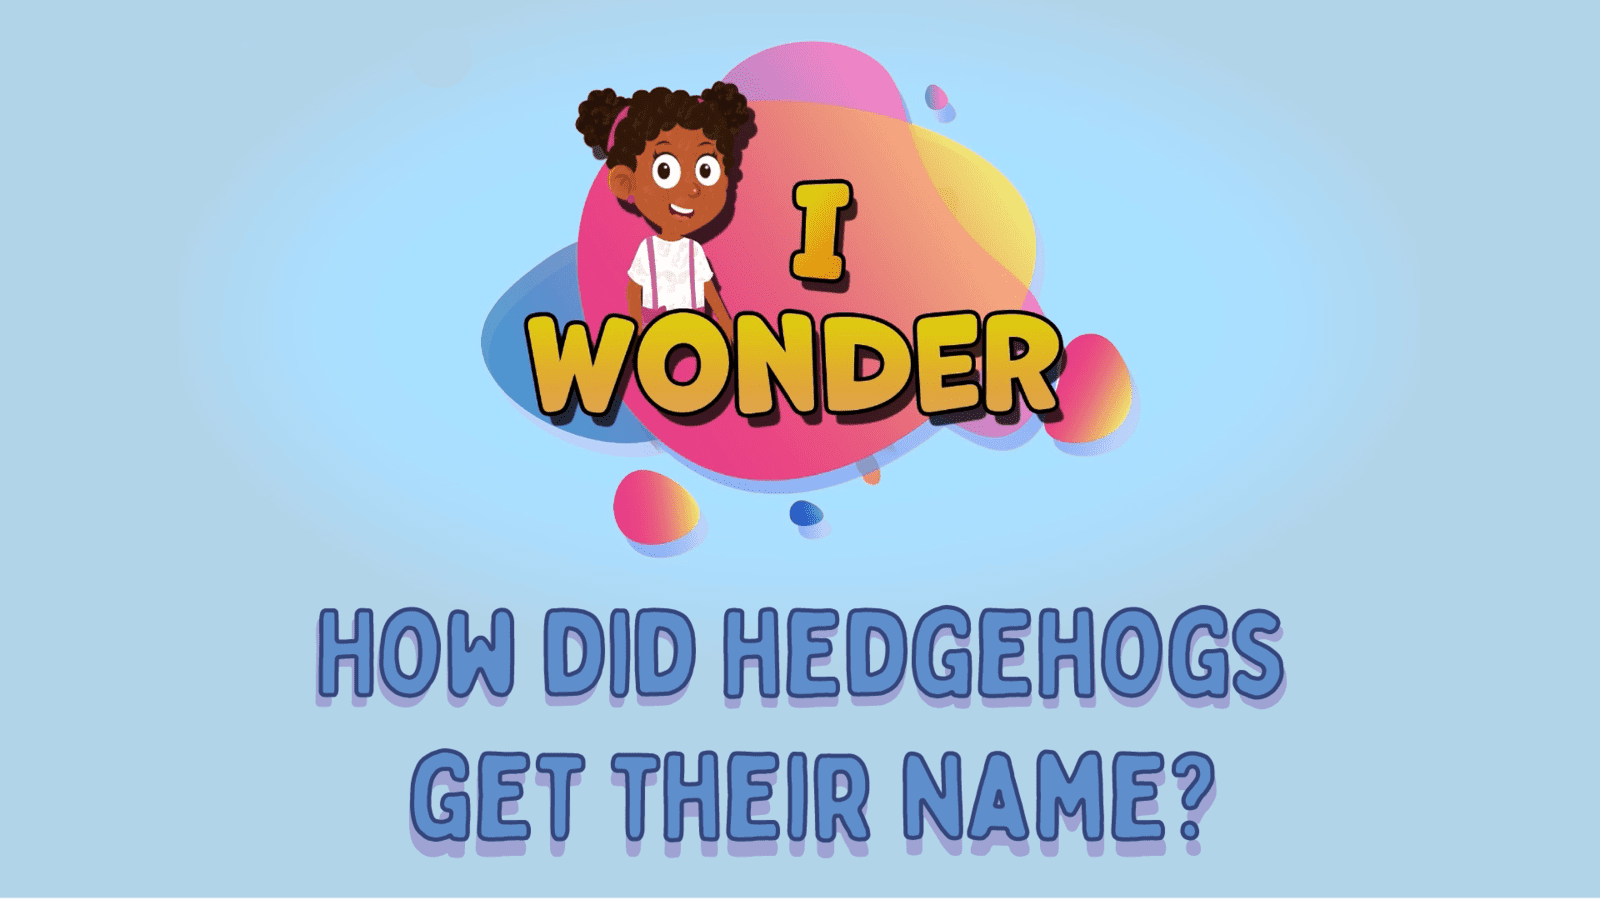 Hedgehogs Get Their Name LearningMole